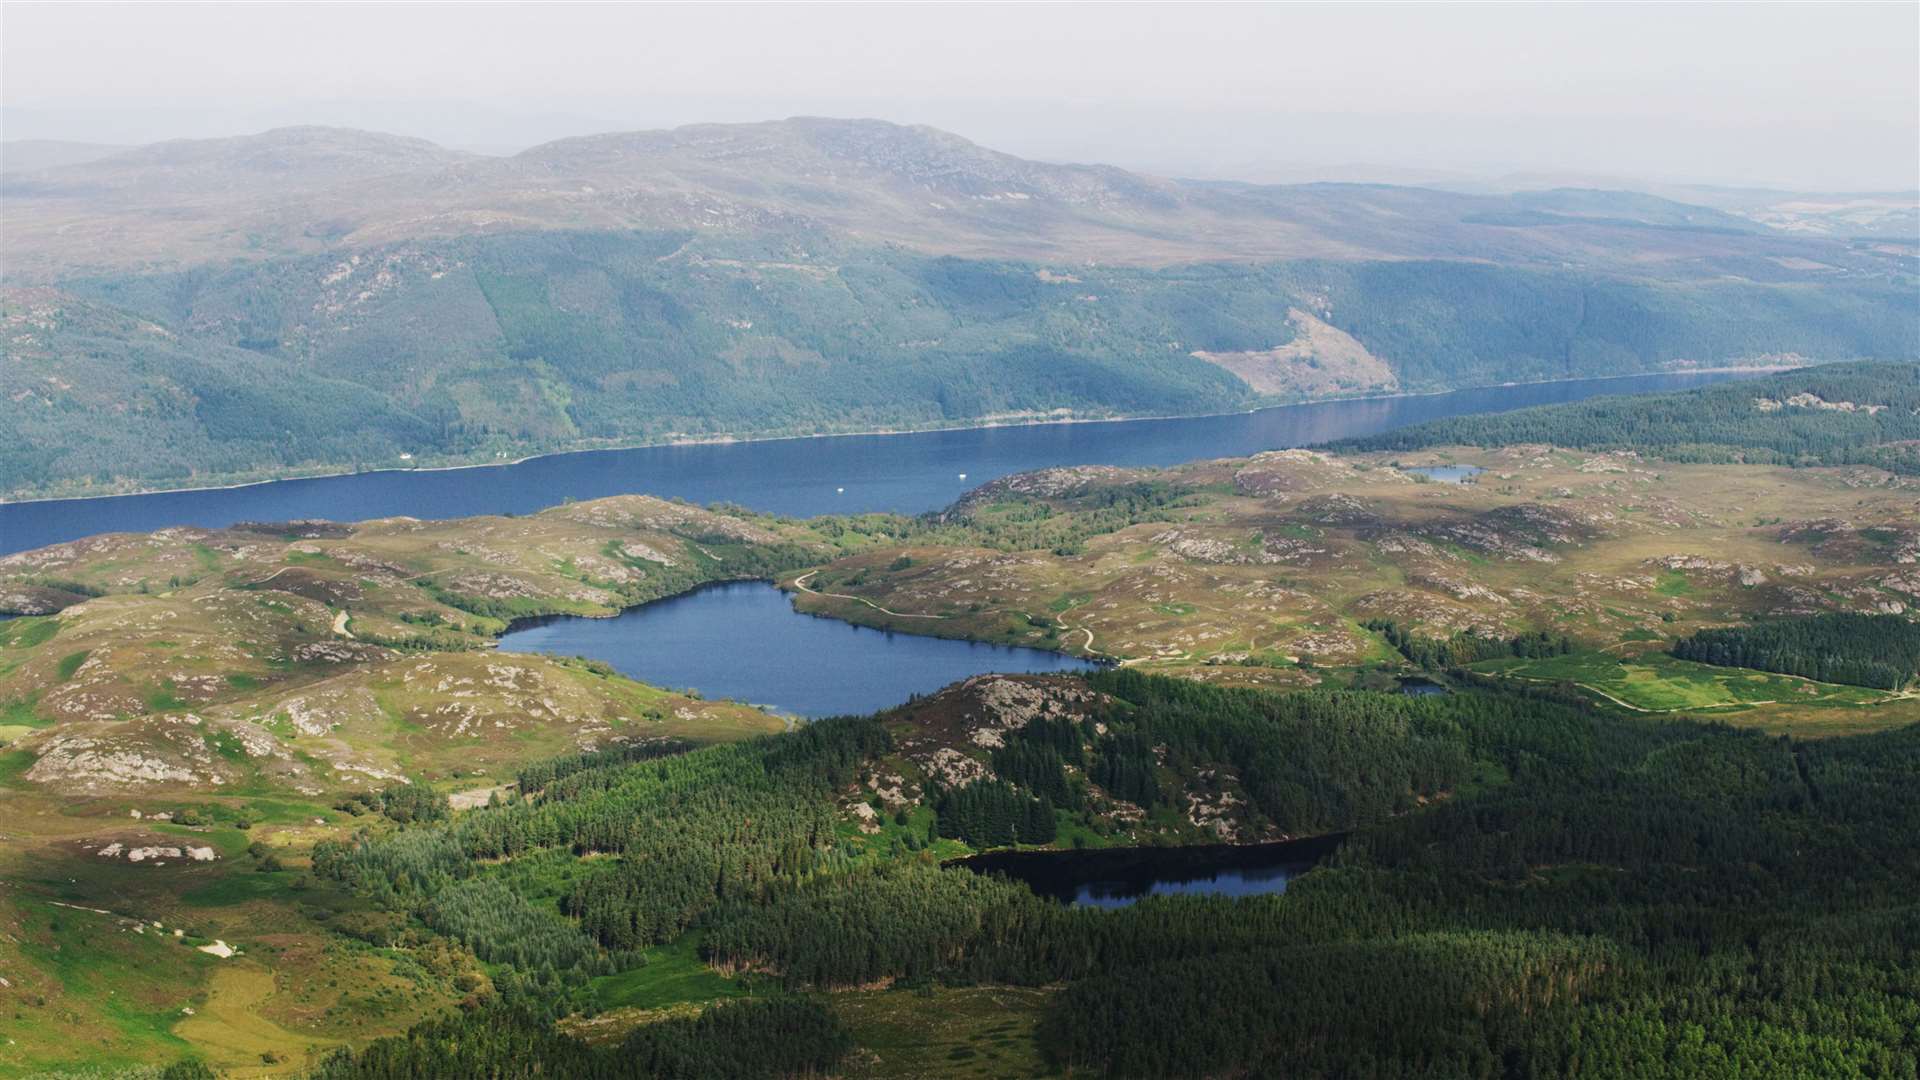 The proposed Loch Kemp scheme is on the south side of Loch Ness.